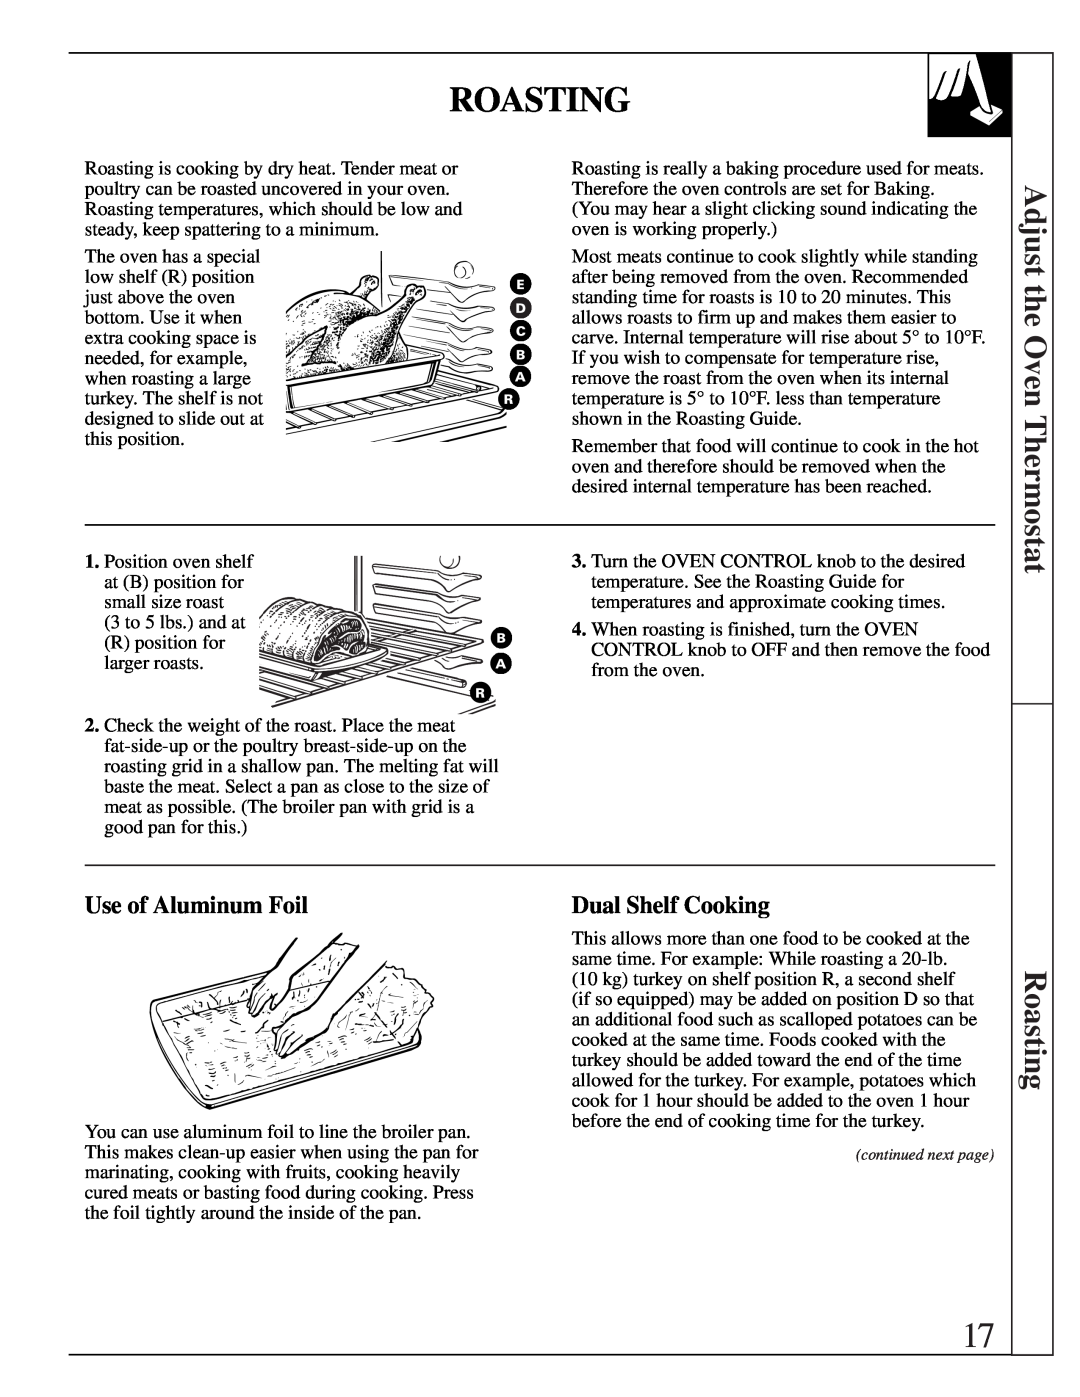 GE XL44TM installation instructions Roasting, the Oven Thermostat, Use of Aluminum Foil, Dual Shelf Cooking 